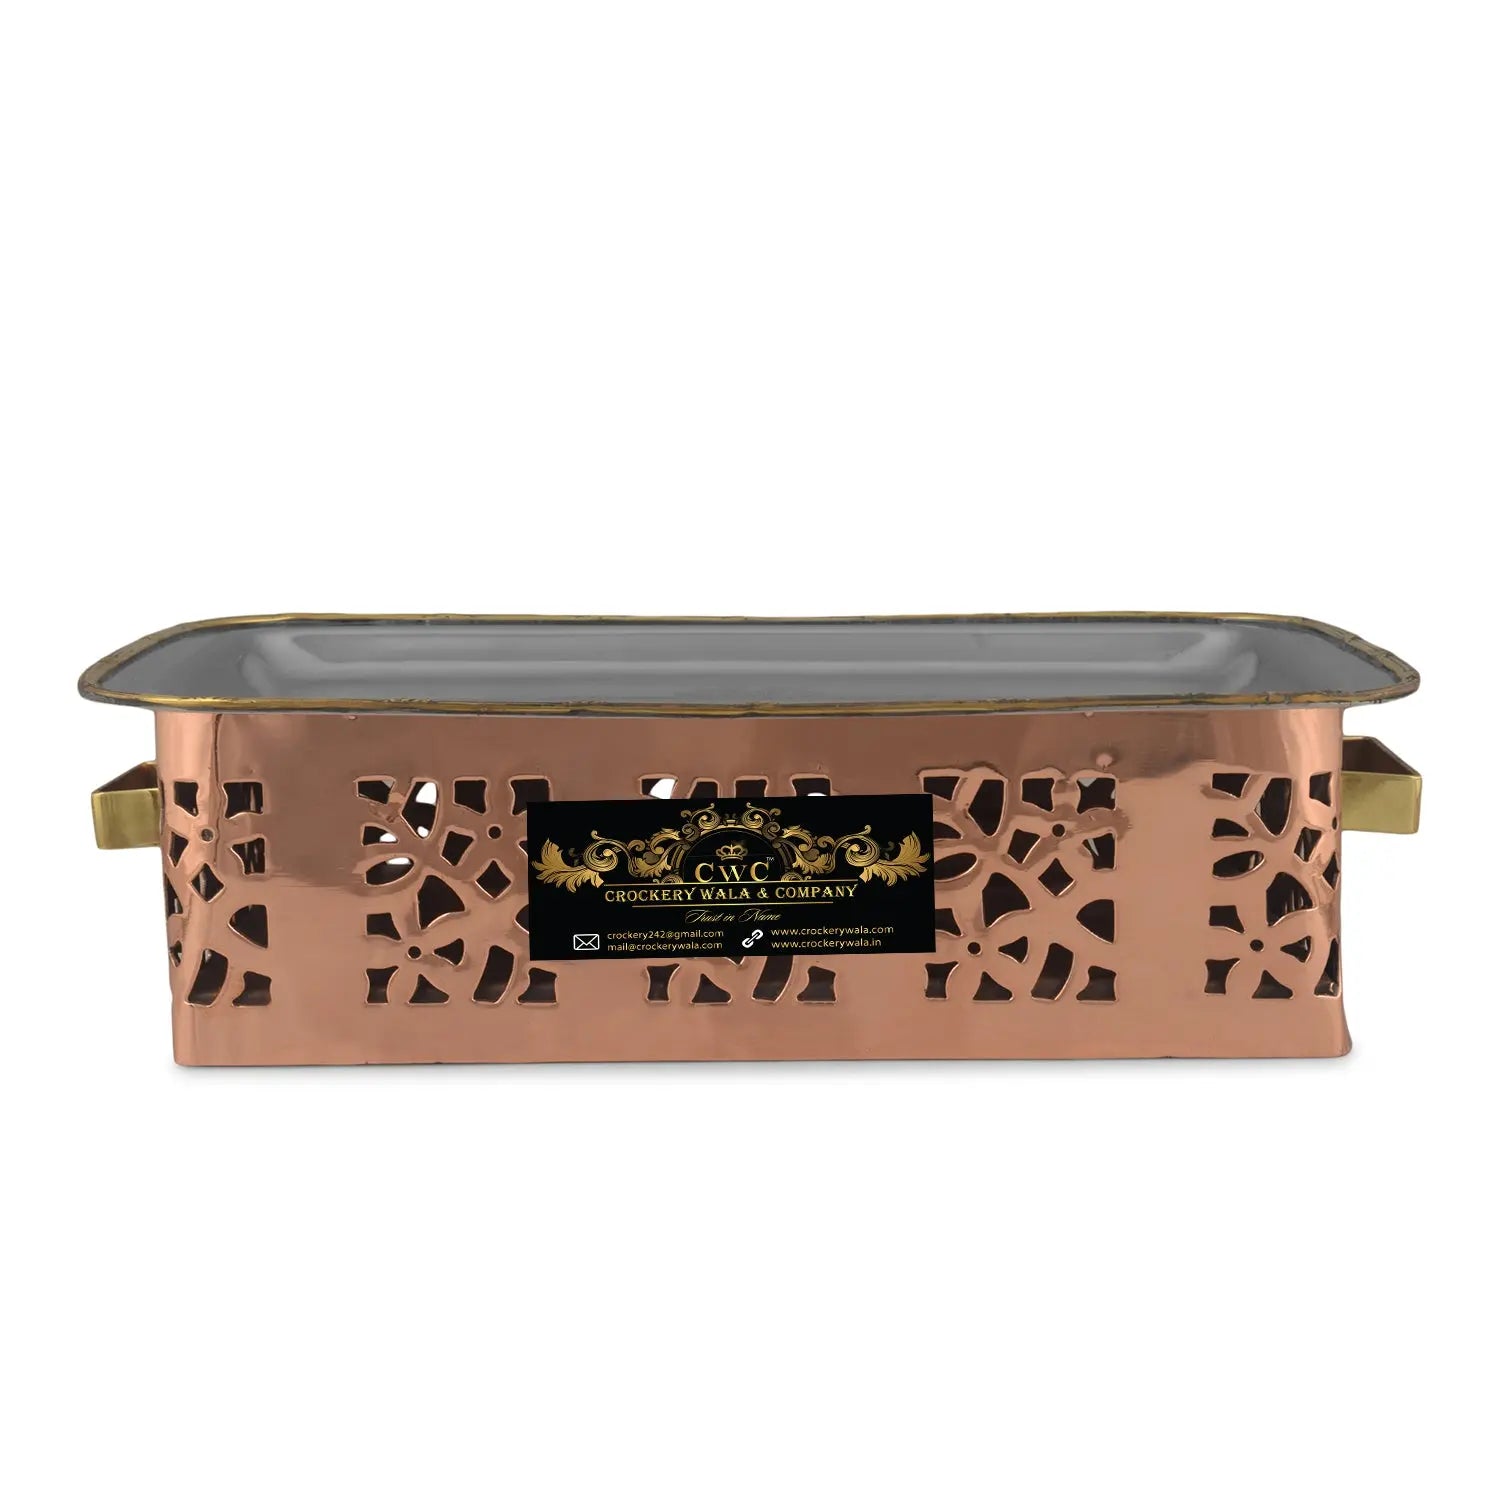 Pure Copper Snack Warmer For Serving In Parties Rectangle - CROCKERY WALA AND COMPANY 